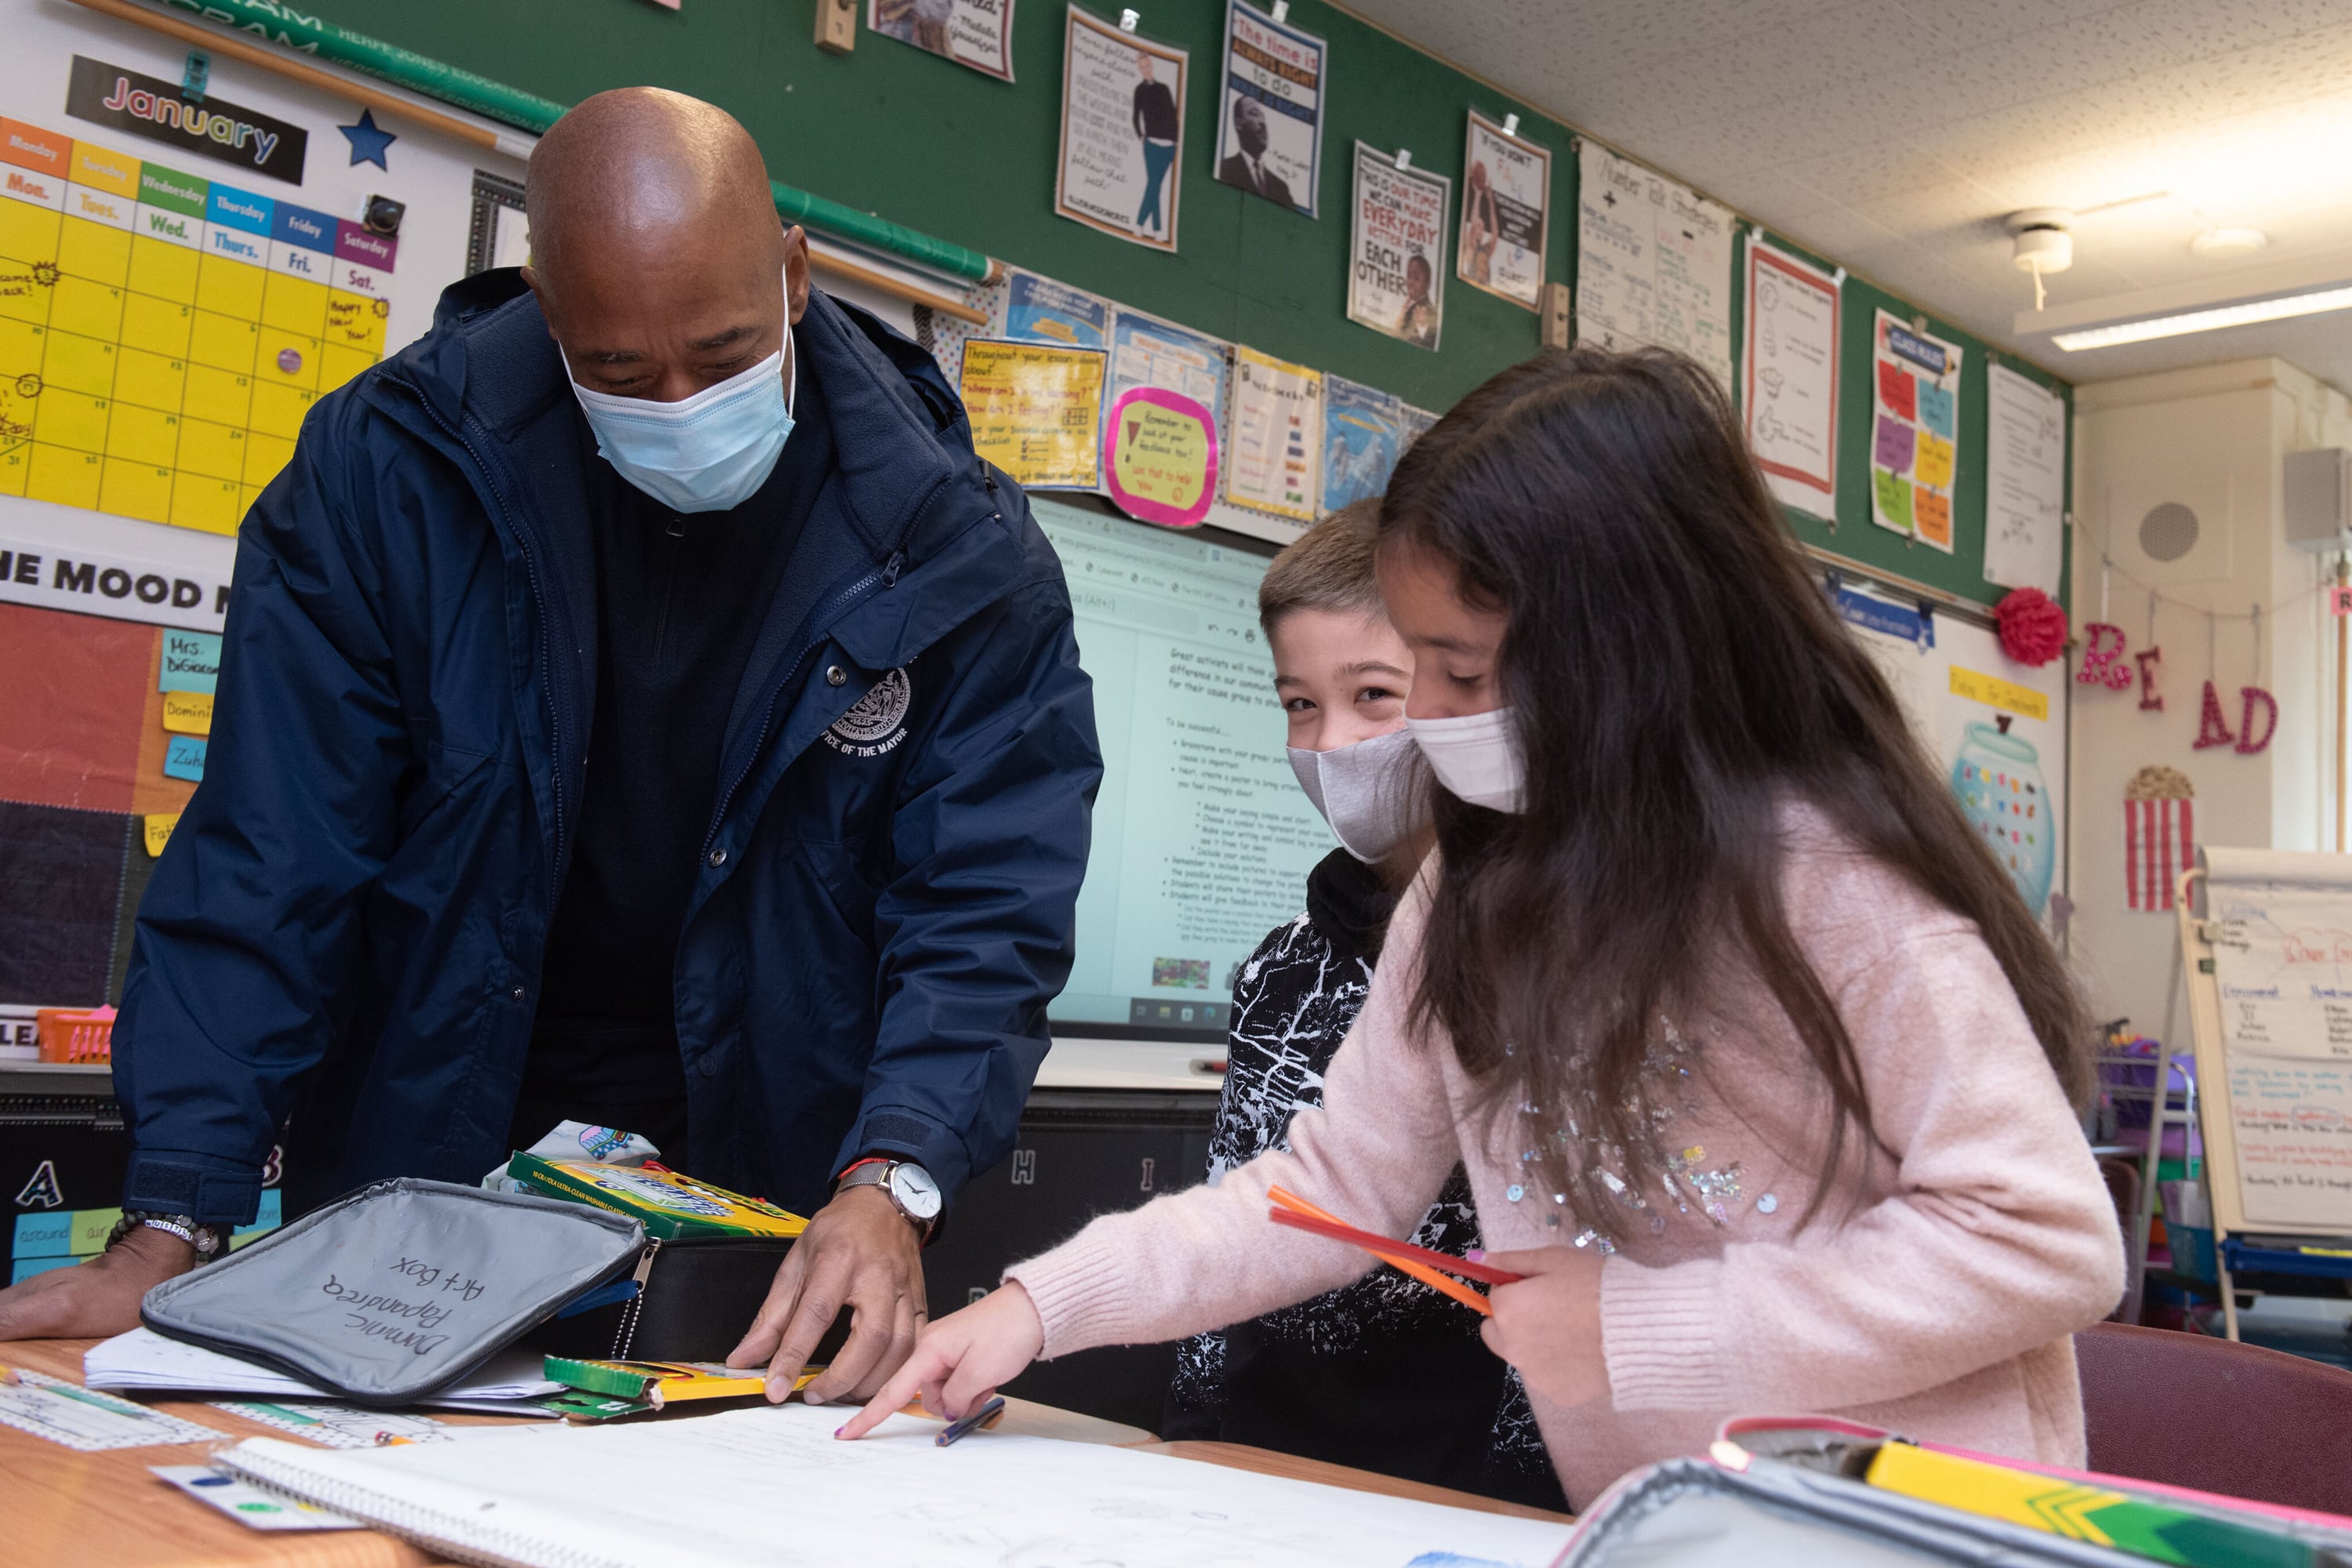 A man in a mask and a blue jacket looks at school work in a classroom with two children, also in masks. 